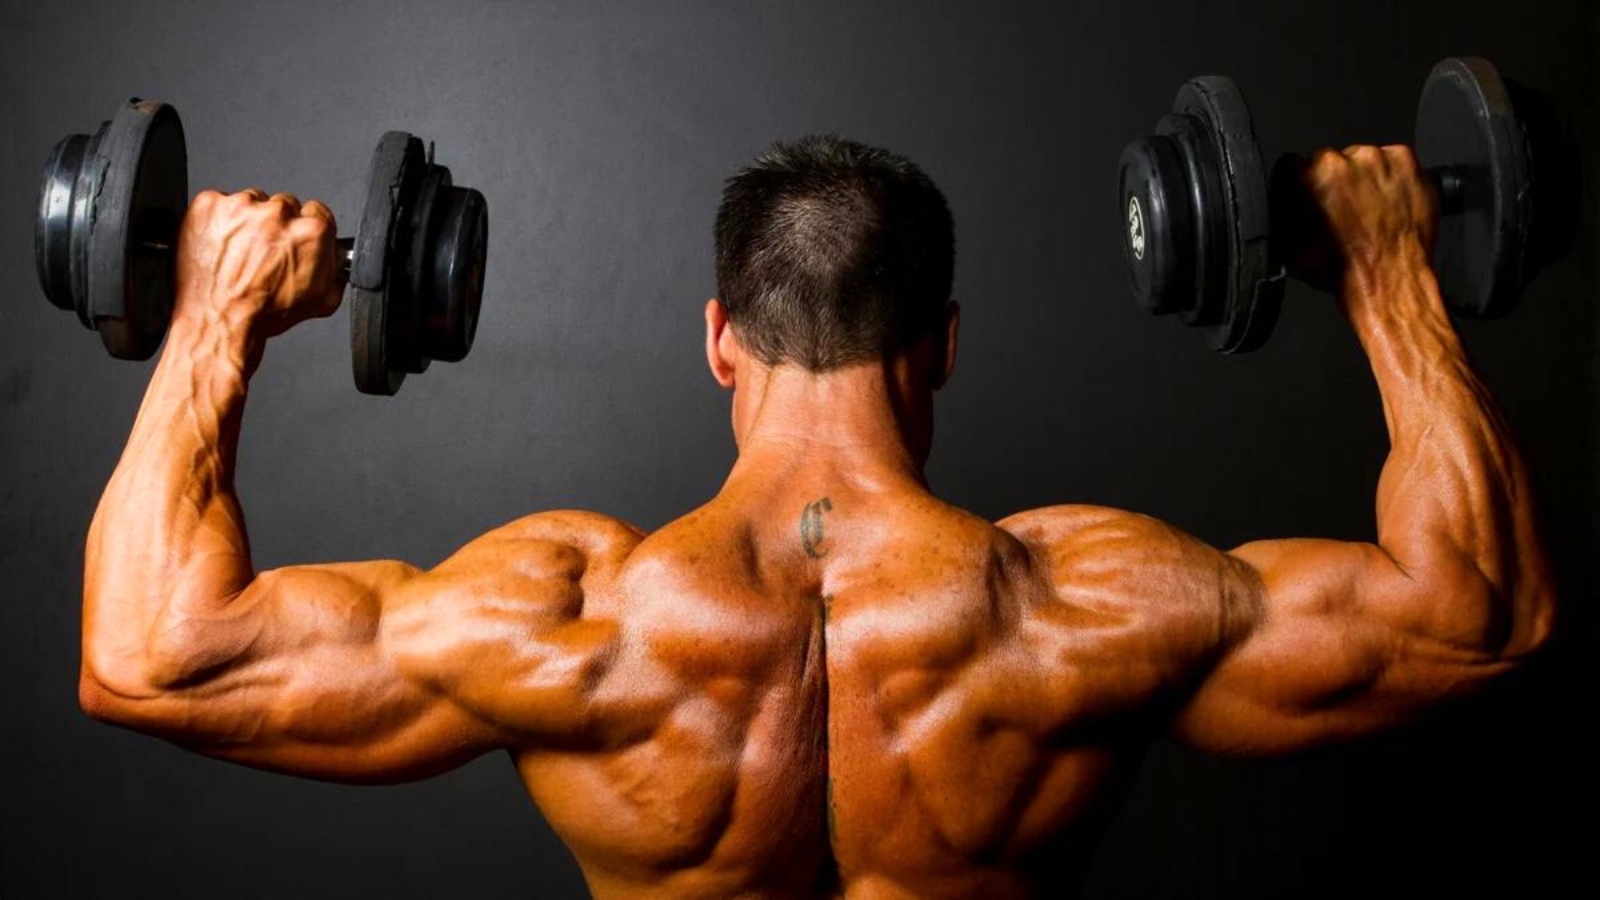 SHOULDERS AND ARMS WORKOUT FOR MASS